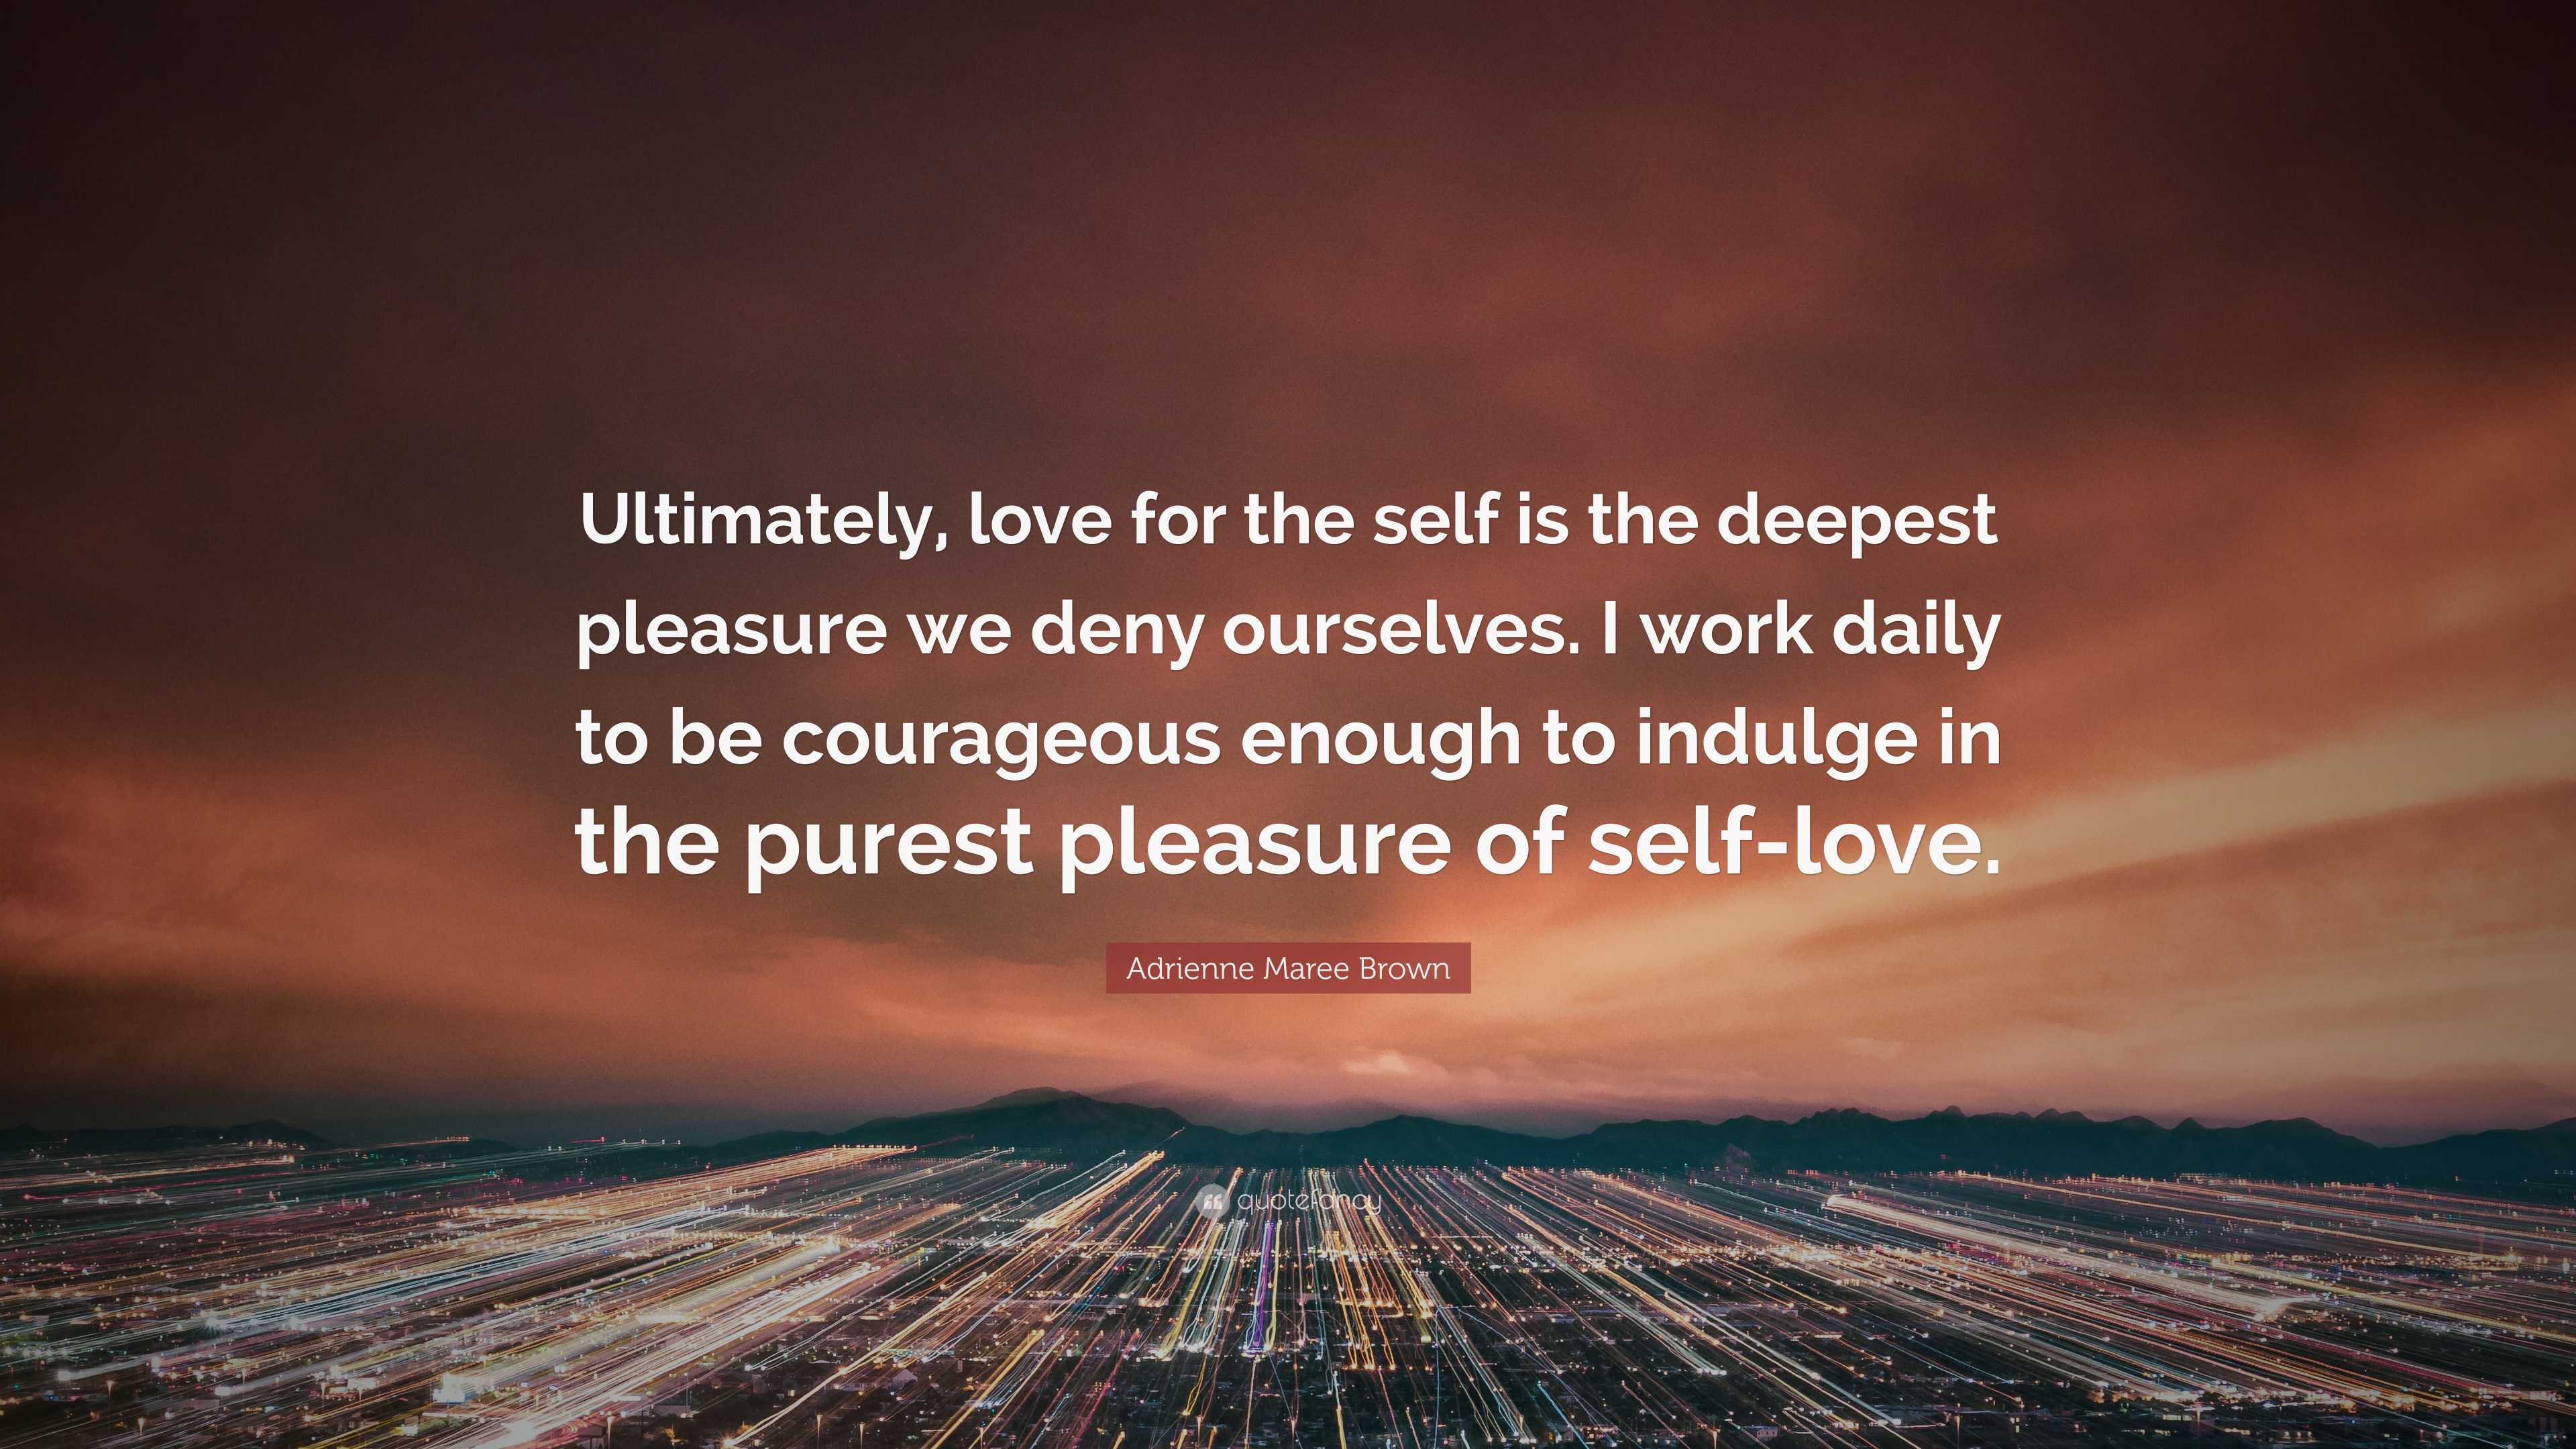 Adrienne Maree Brown Quote: “Ultimately, love for the self is the deepest  pleasure we deny ourselves. I work daily to be courageous enough to  indulge”